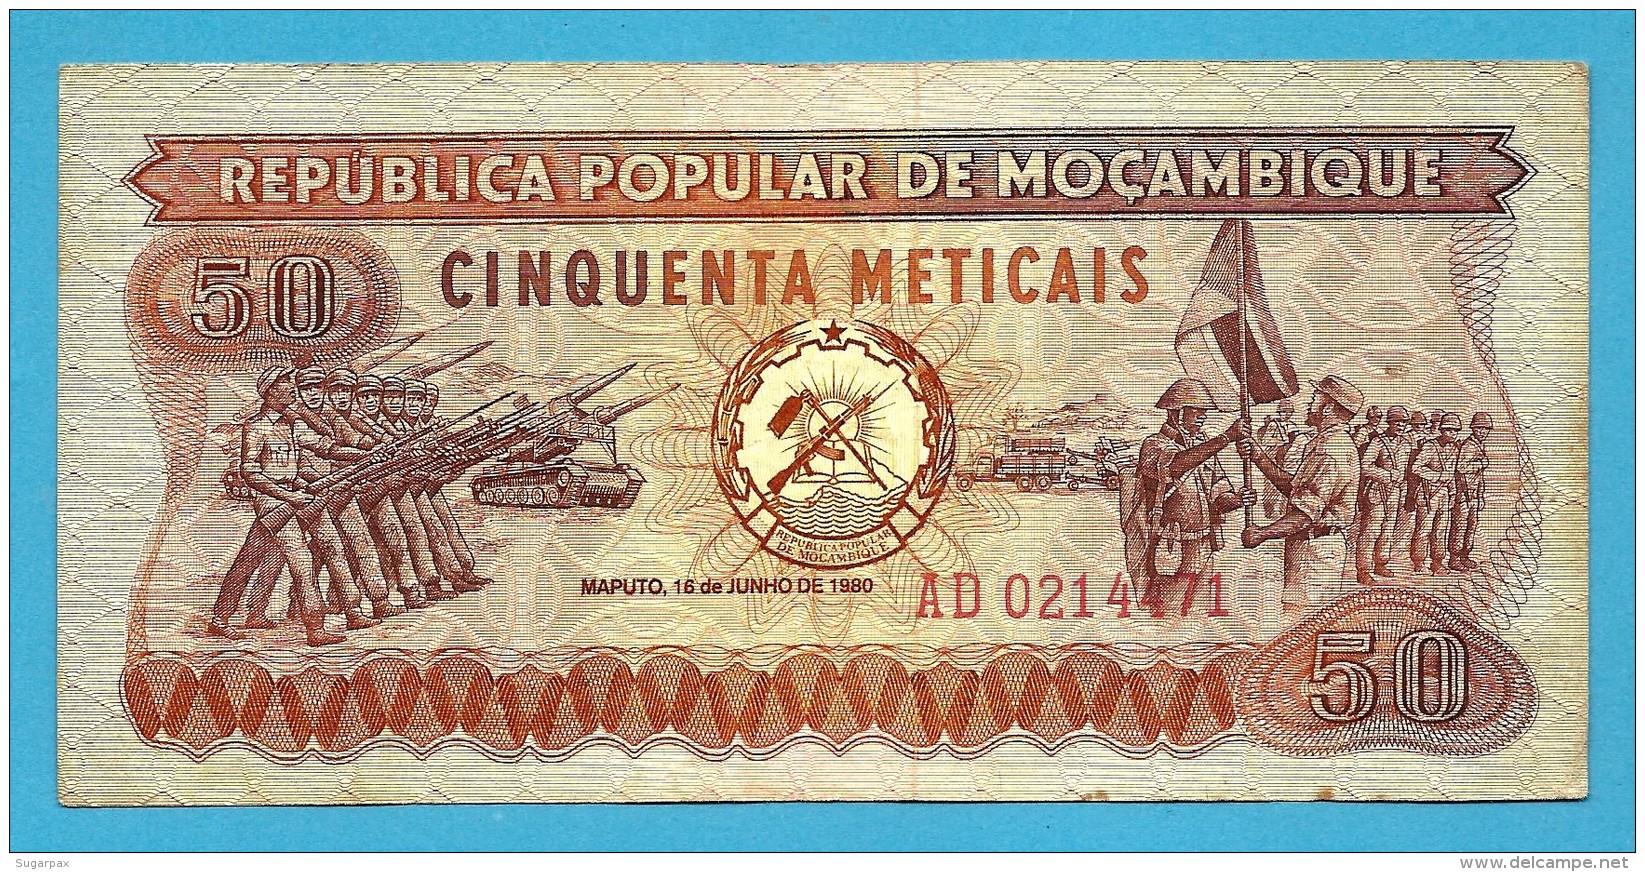 MOZAMBIQUE - 50 METICAIS - 16.06.1980 - P 125 -  Série AD - Soldiers, Flag Ceremony / Soldiers In Training - Mozambique